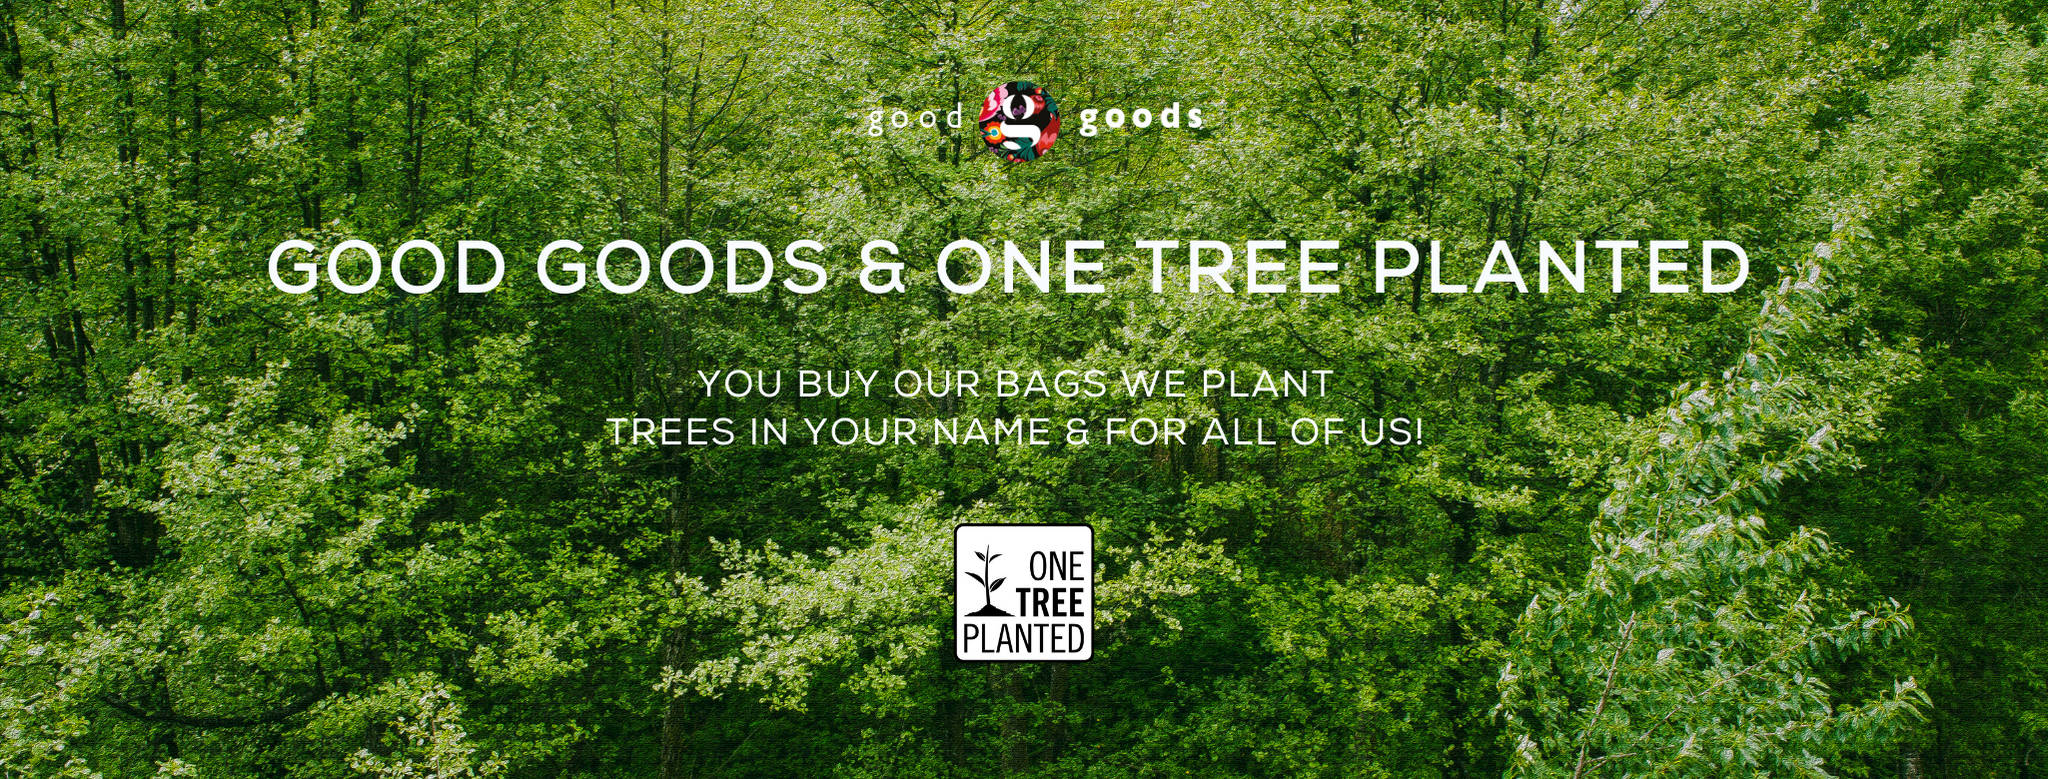 Good Goods & One Tree Planted - We plant trees when you buy our bags!